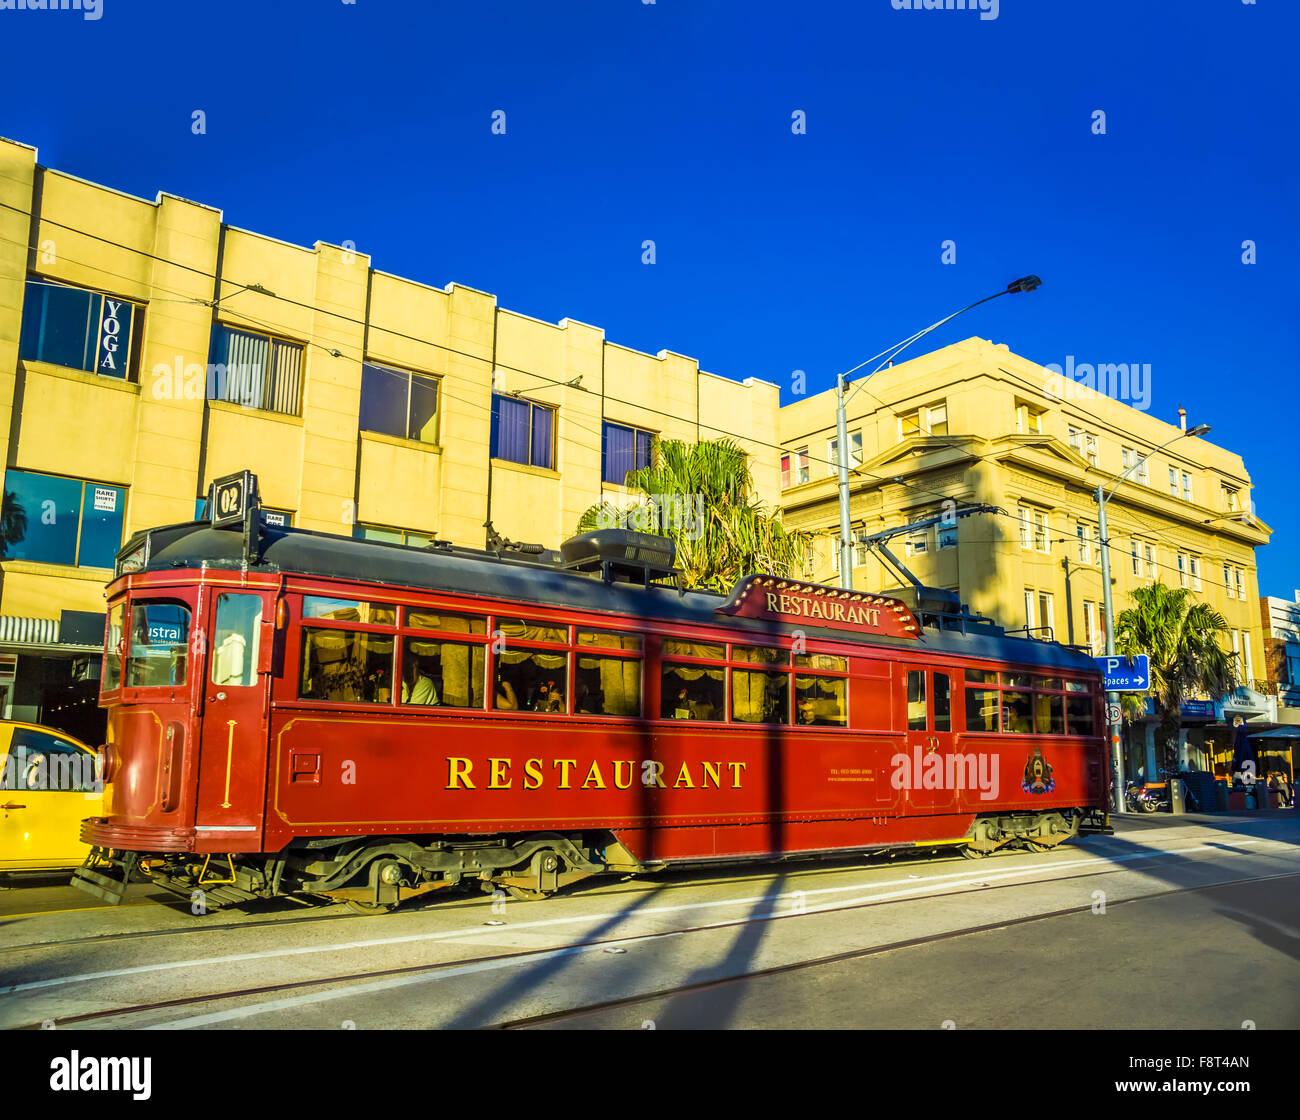 Melbourne Colonial Tramcar Restaurant, a travelling restaurant sightseeing tour from a converted traditional Melbourne tram, St Kilda, Australia Stock Photo